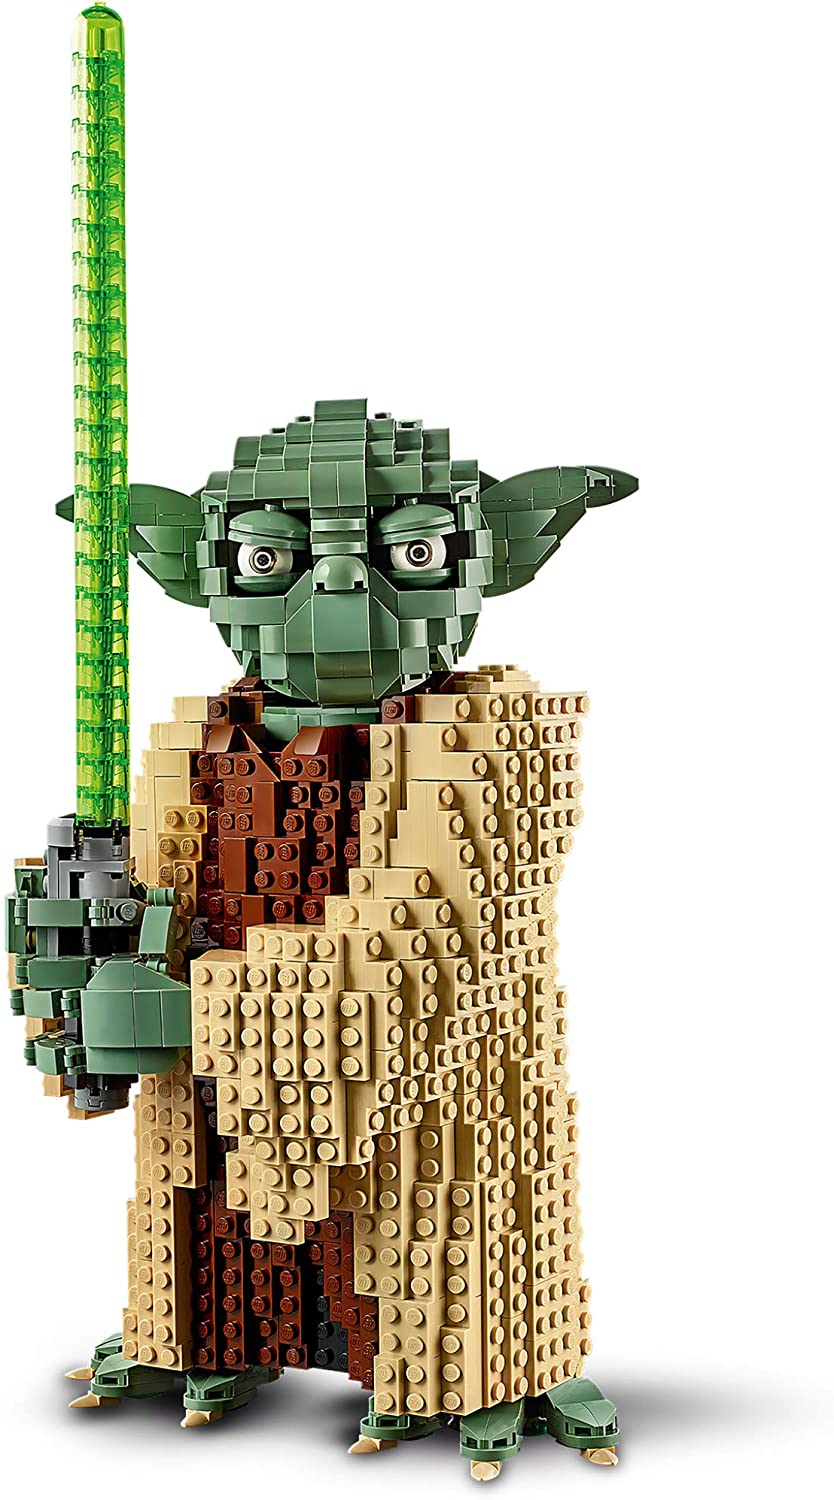 LEGO Star Wars: Attack of the Clones Yoda 75255 Yoda Building Model and Collectible Minifigure with Lightsaber (1,771 Pieces)